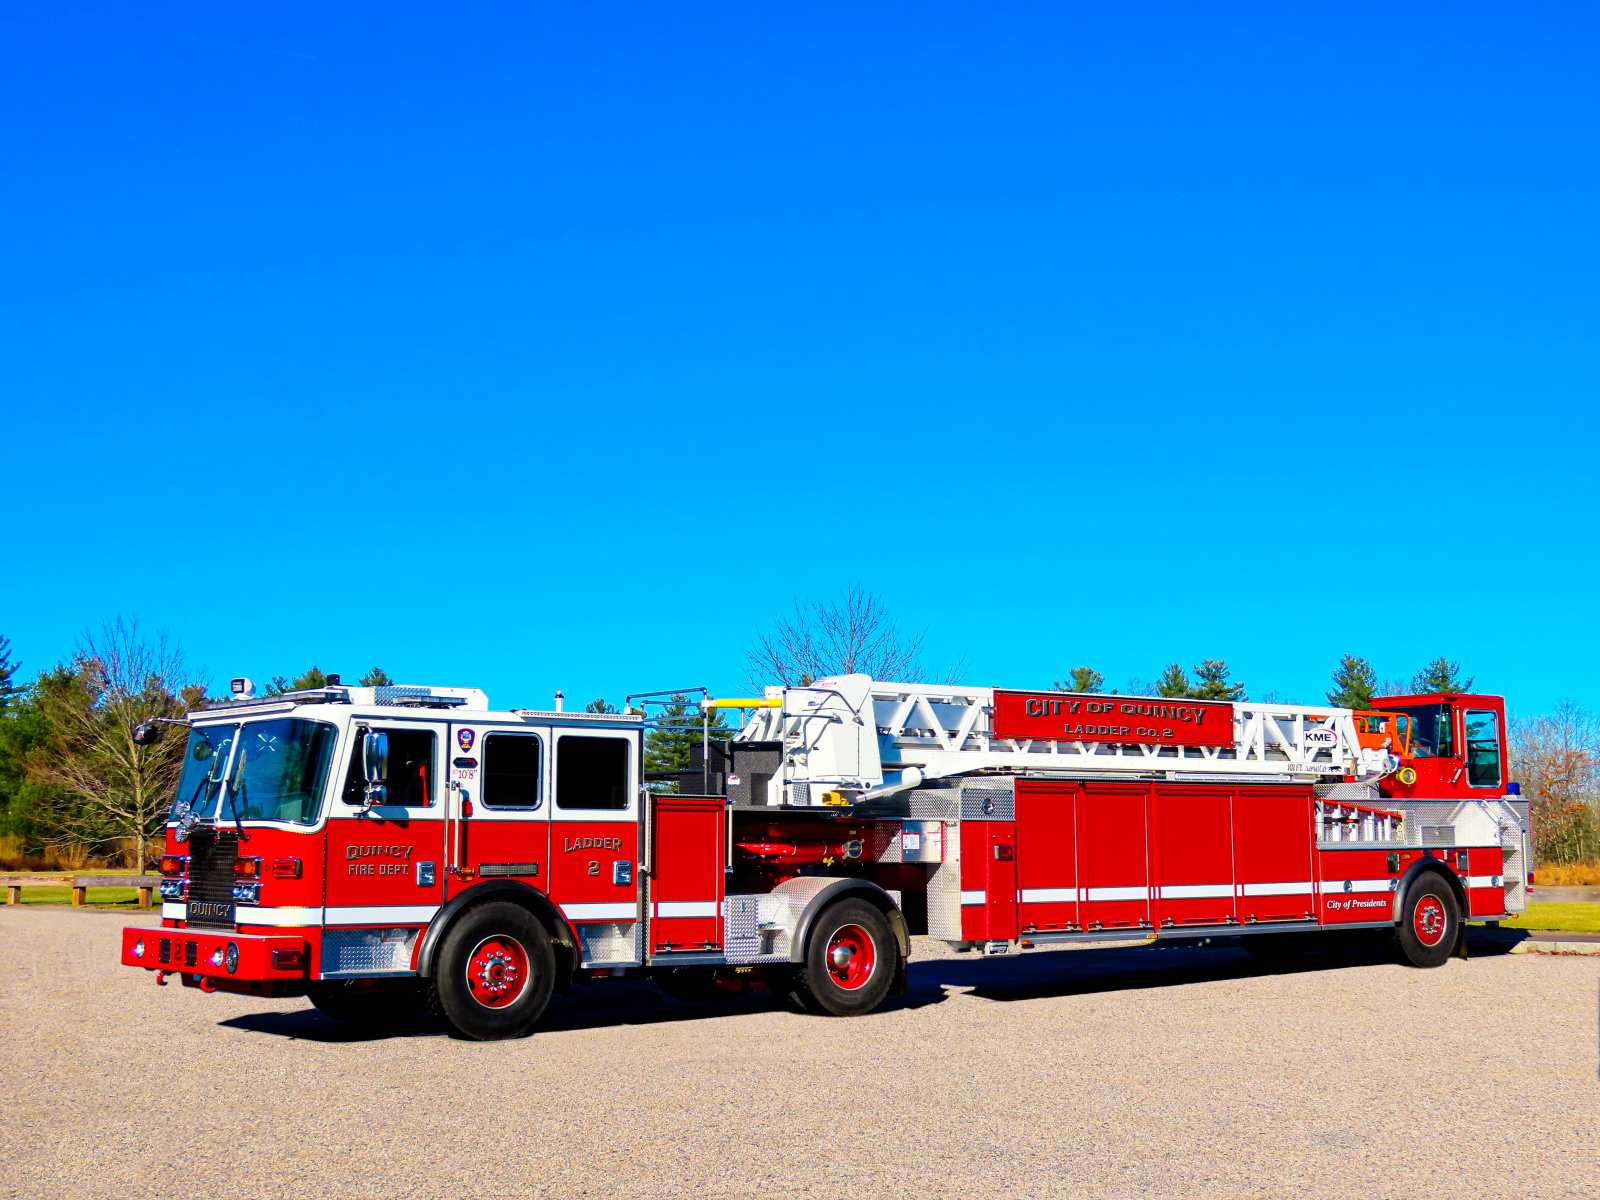 New KME Tractor Drawn Aerial Fire Truck Delivered to Quincy Fire